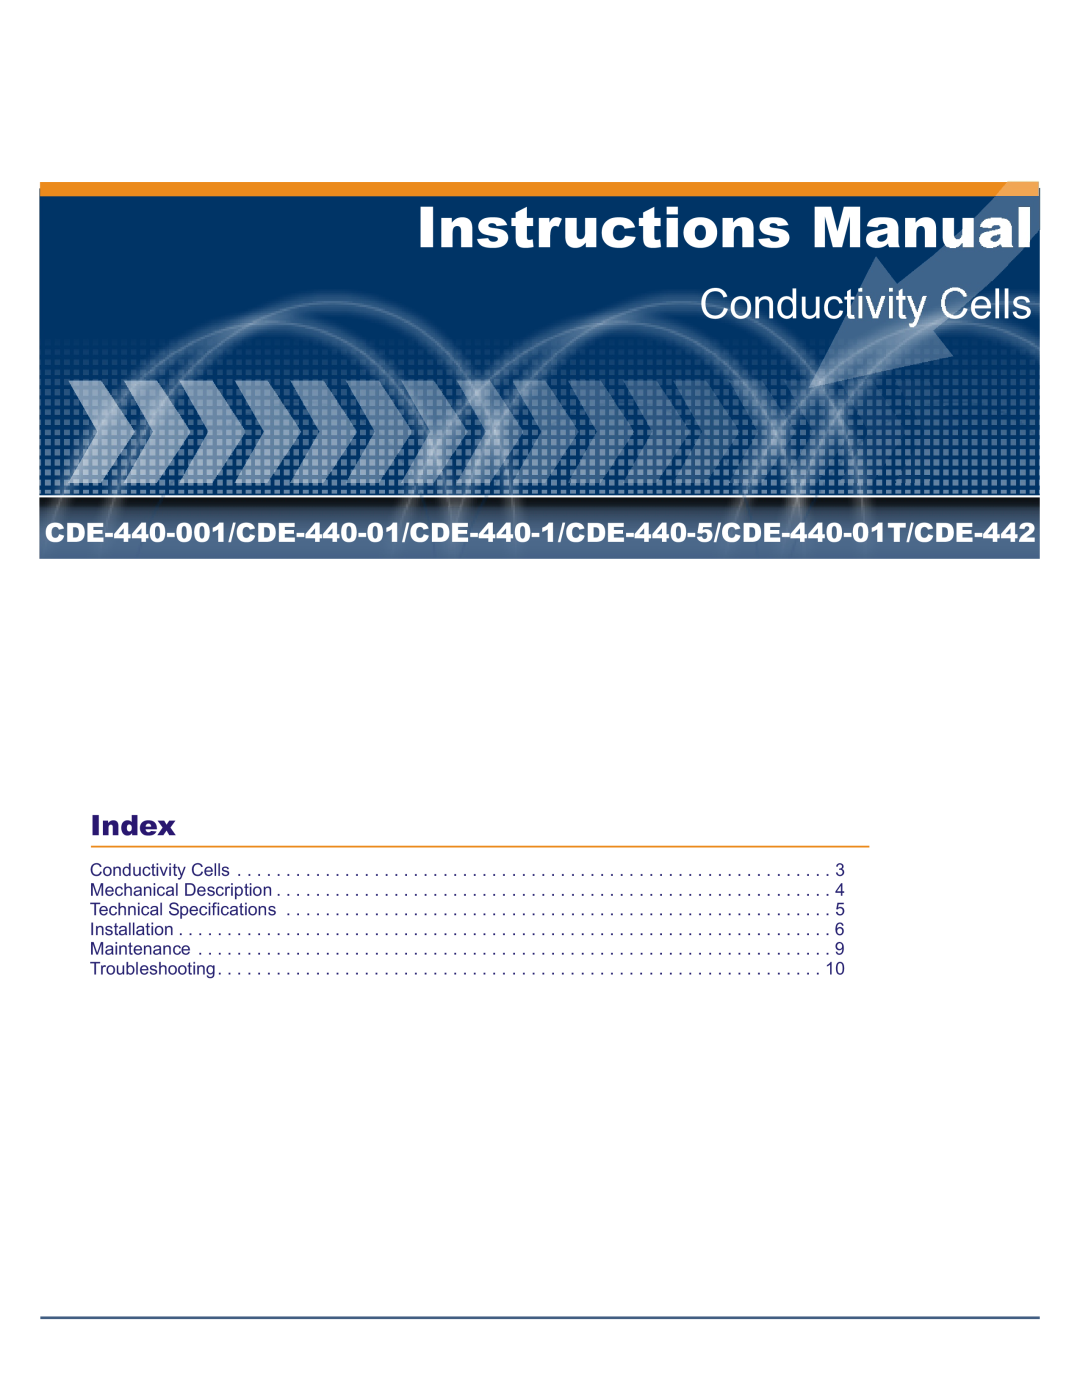 Omega CDE-440 manual Conductivity Cells, Instructions Manual, Index, Installation Maintenance Troubleshooting 